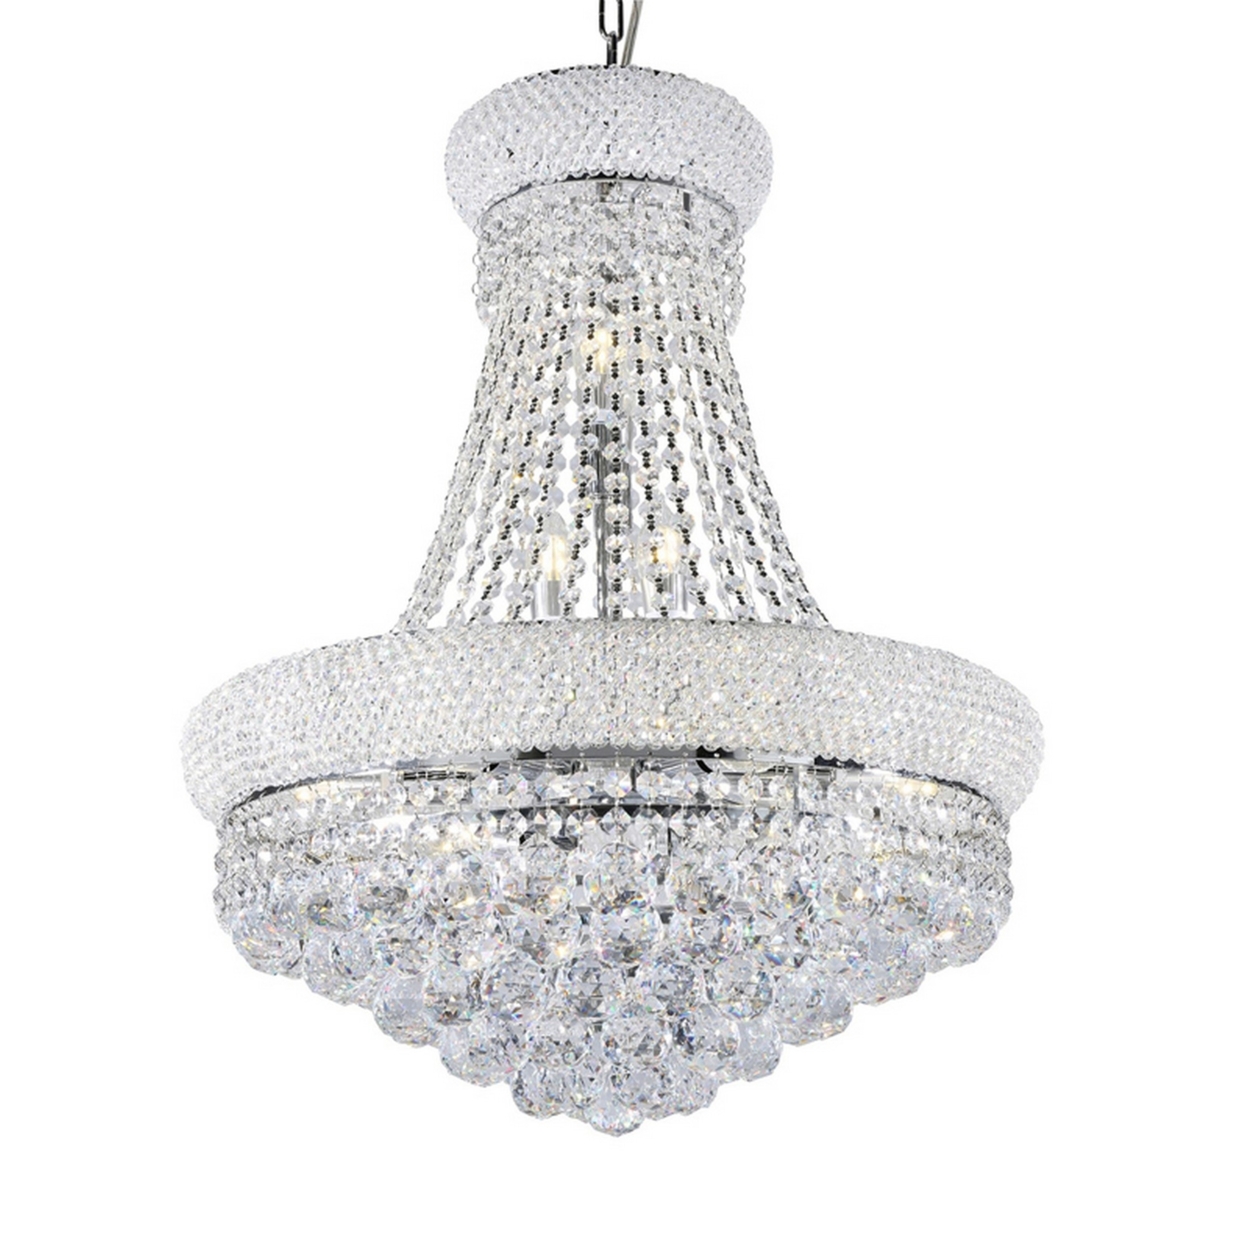 Crystal Ceiling Lamp With Chandelier Design Body, Clear- Saltoro Sherpi